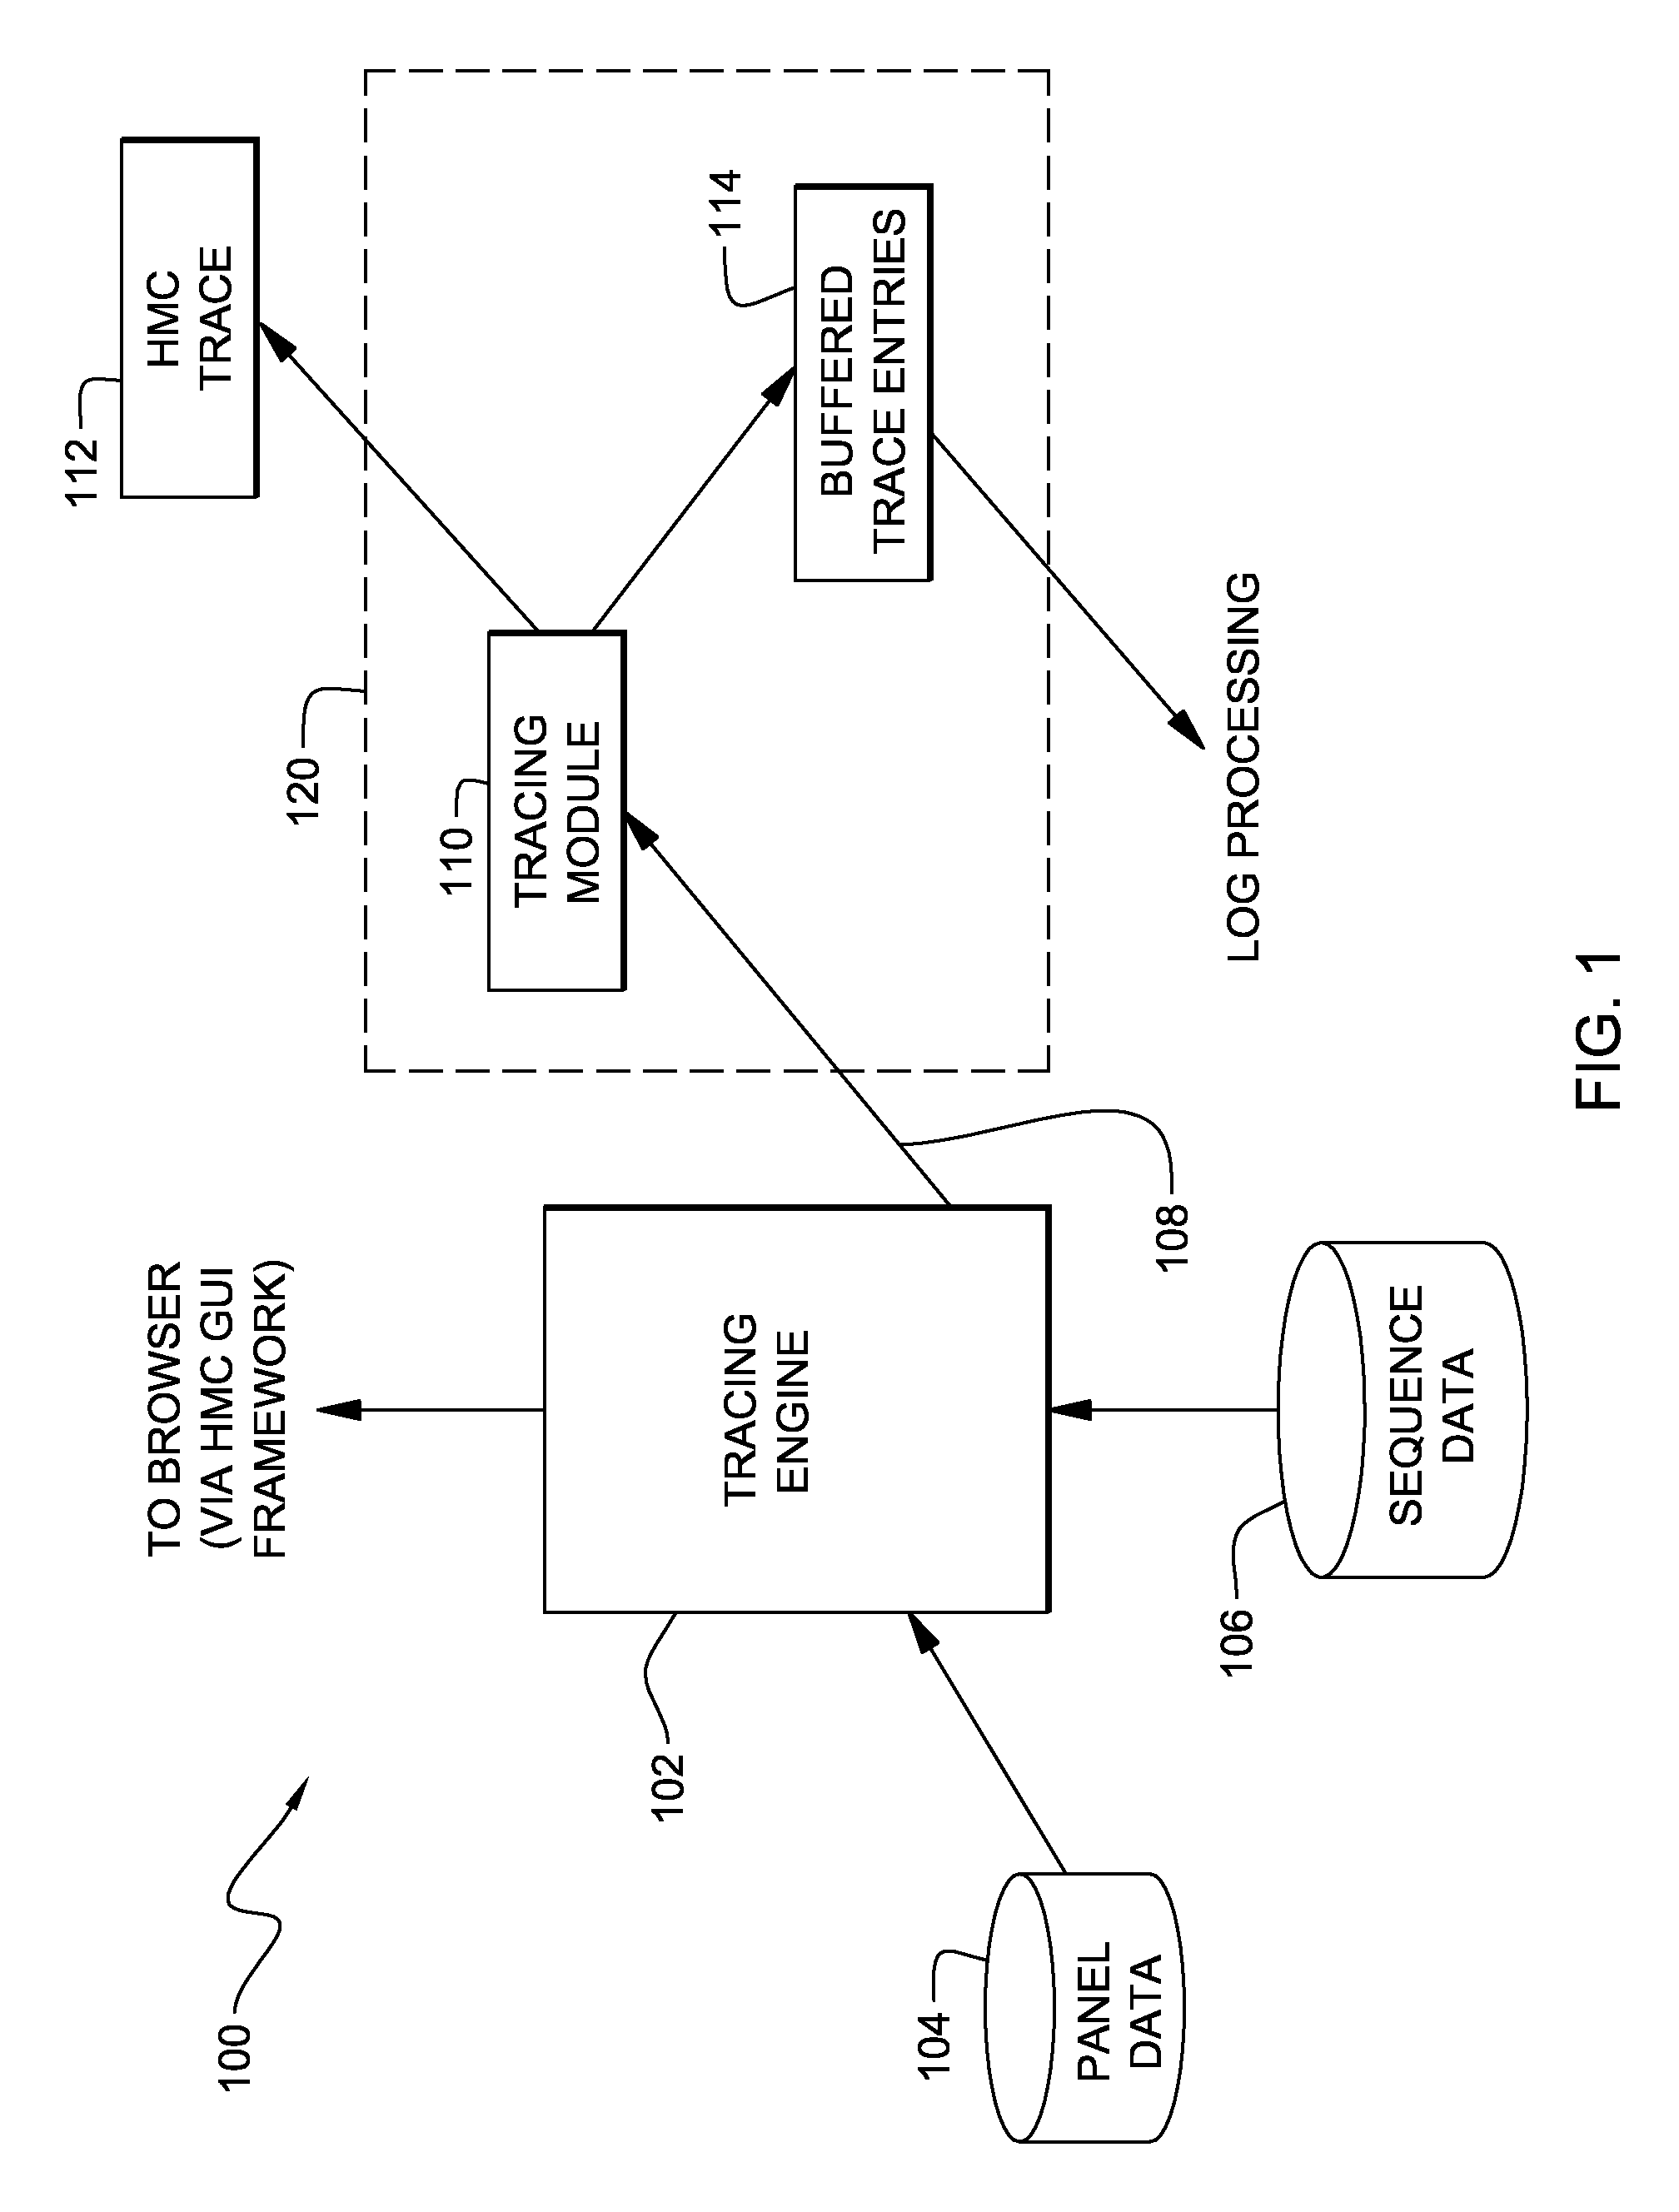 System, method and program product for dynamically adjusting trace buffer capacity based on execution history